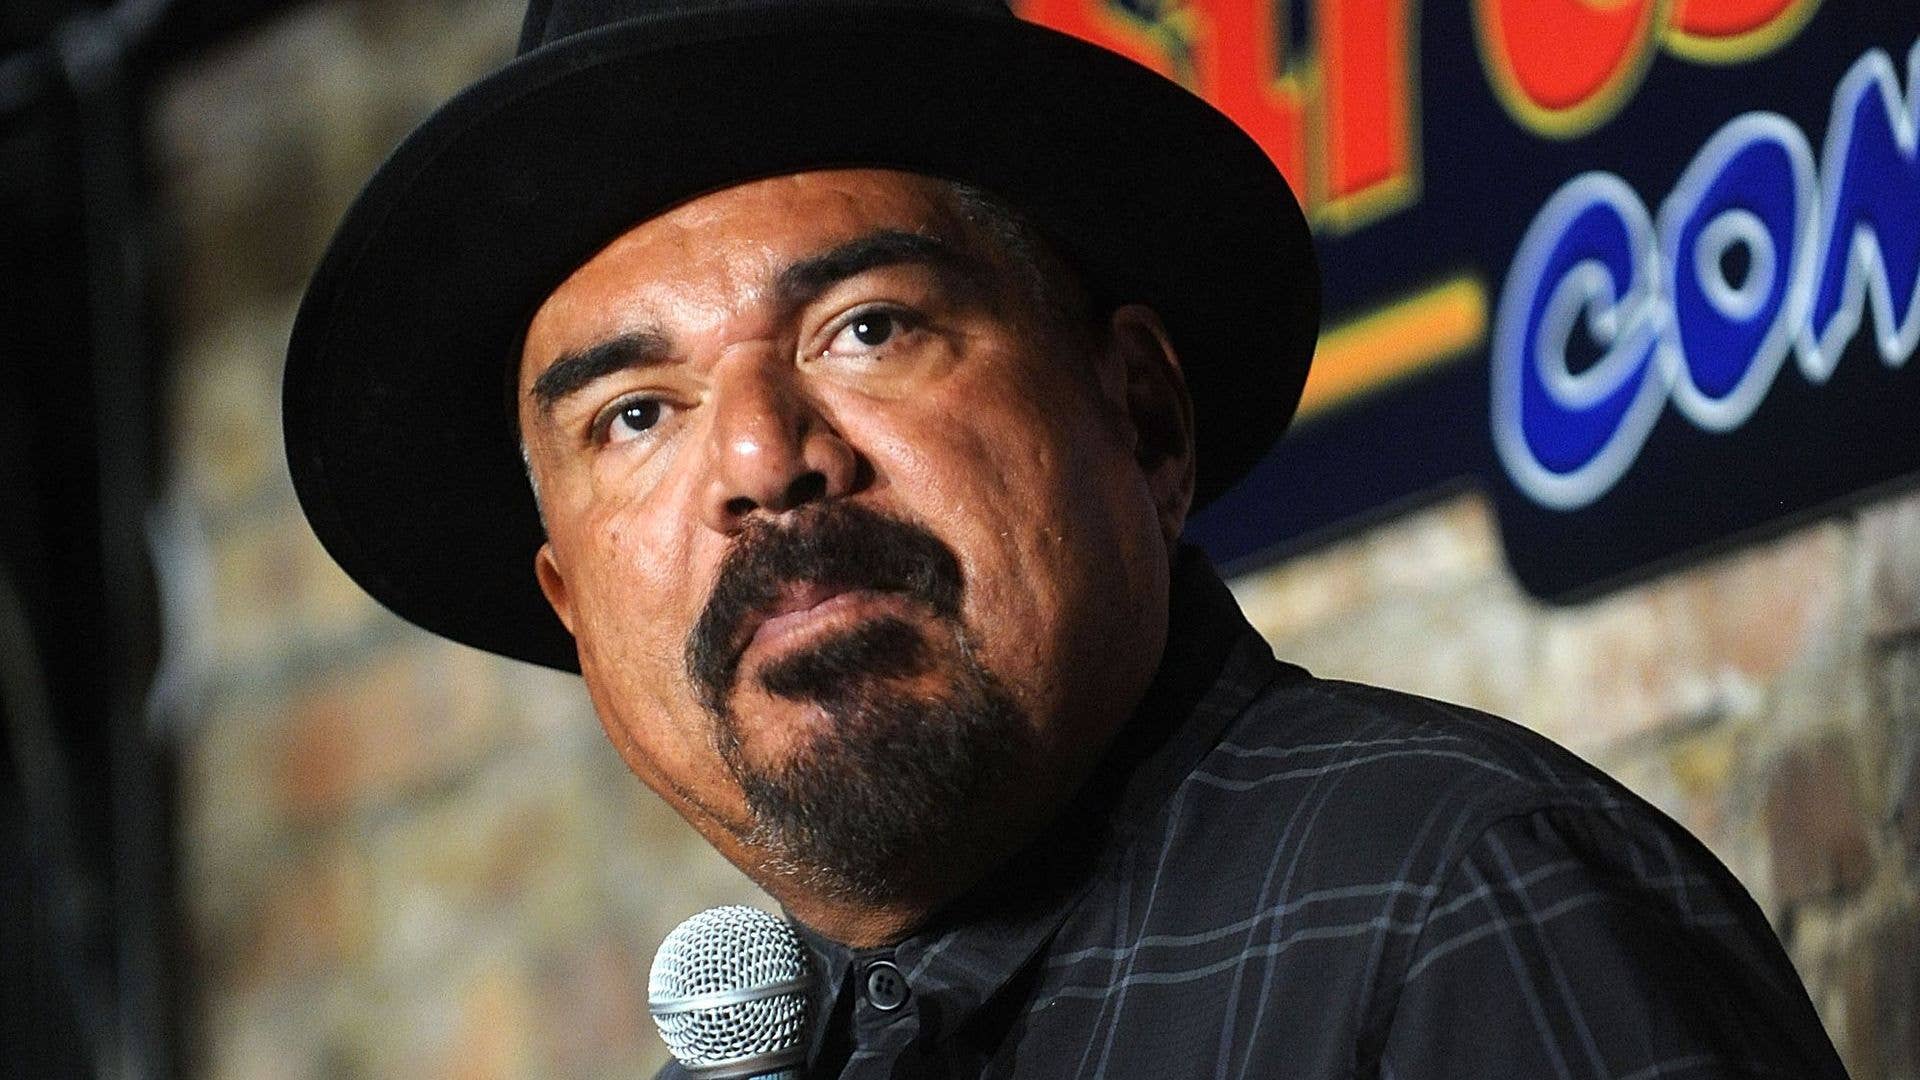 George Lopez performs at The Stress Factory Comedy Club